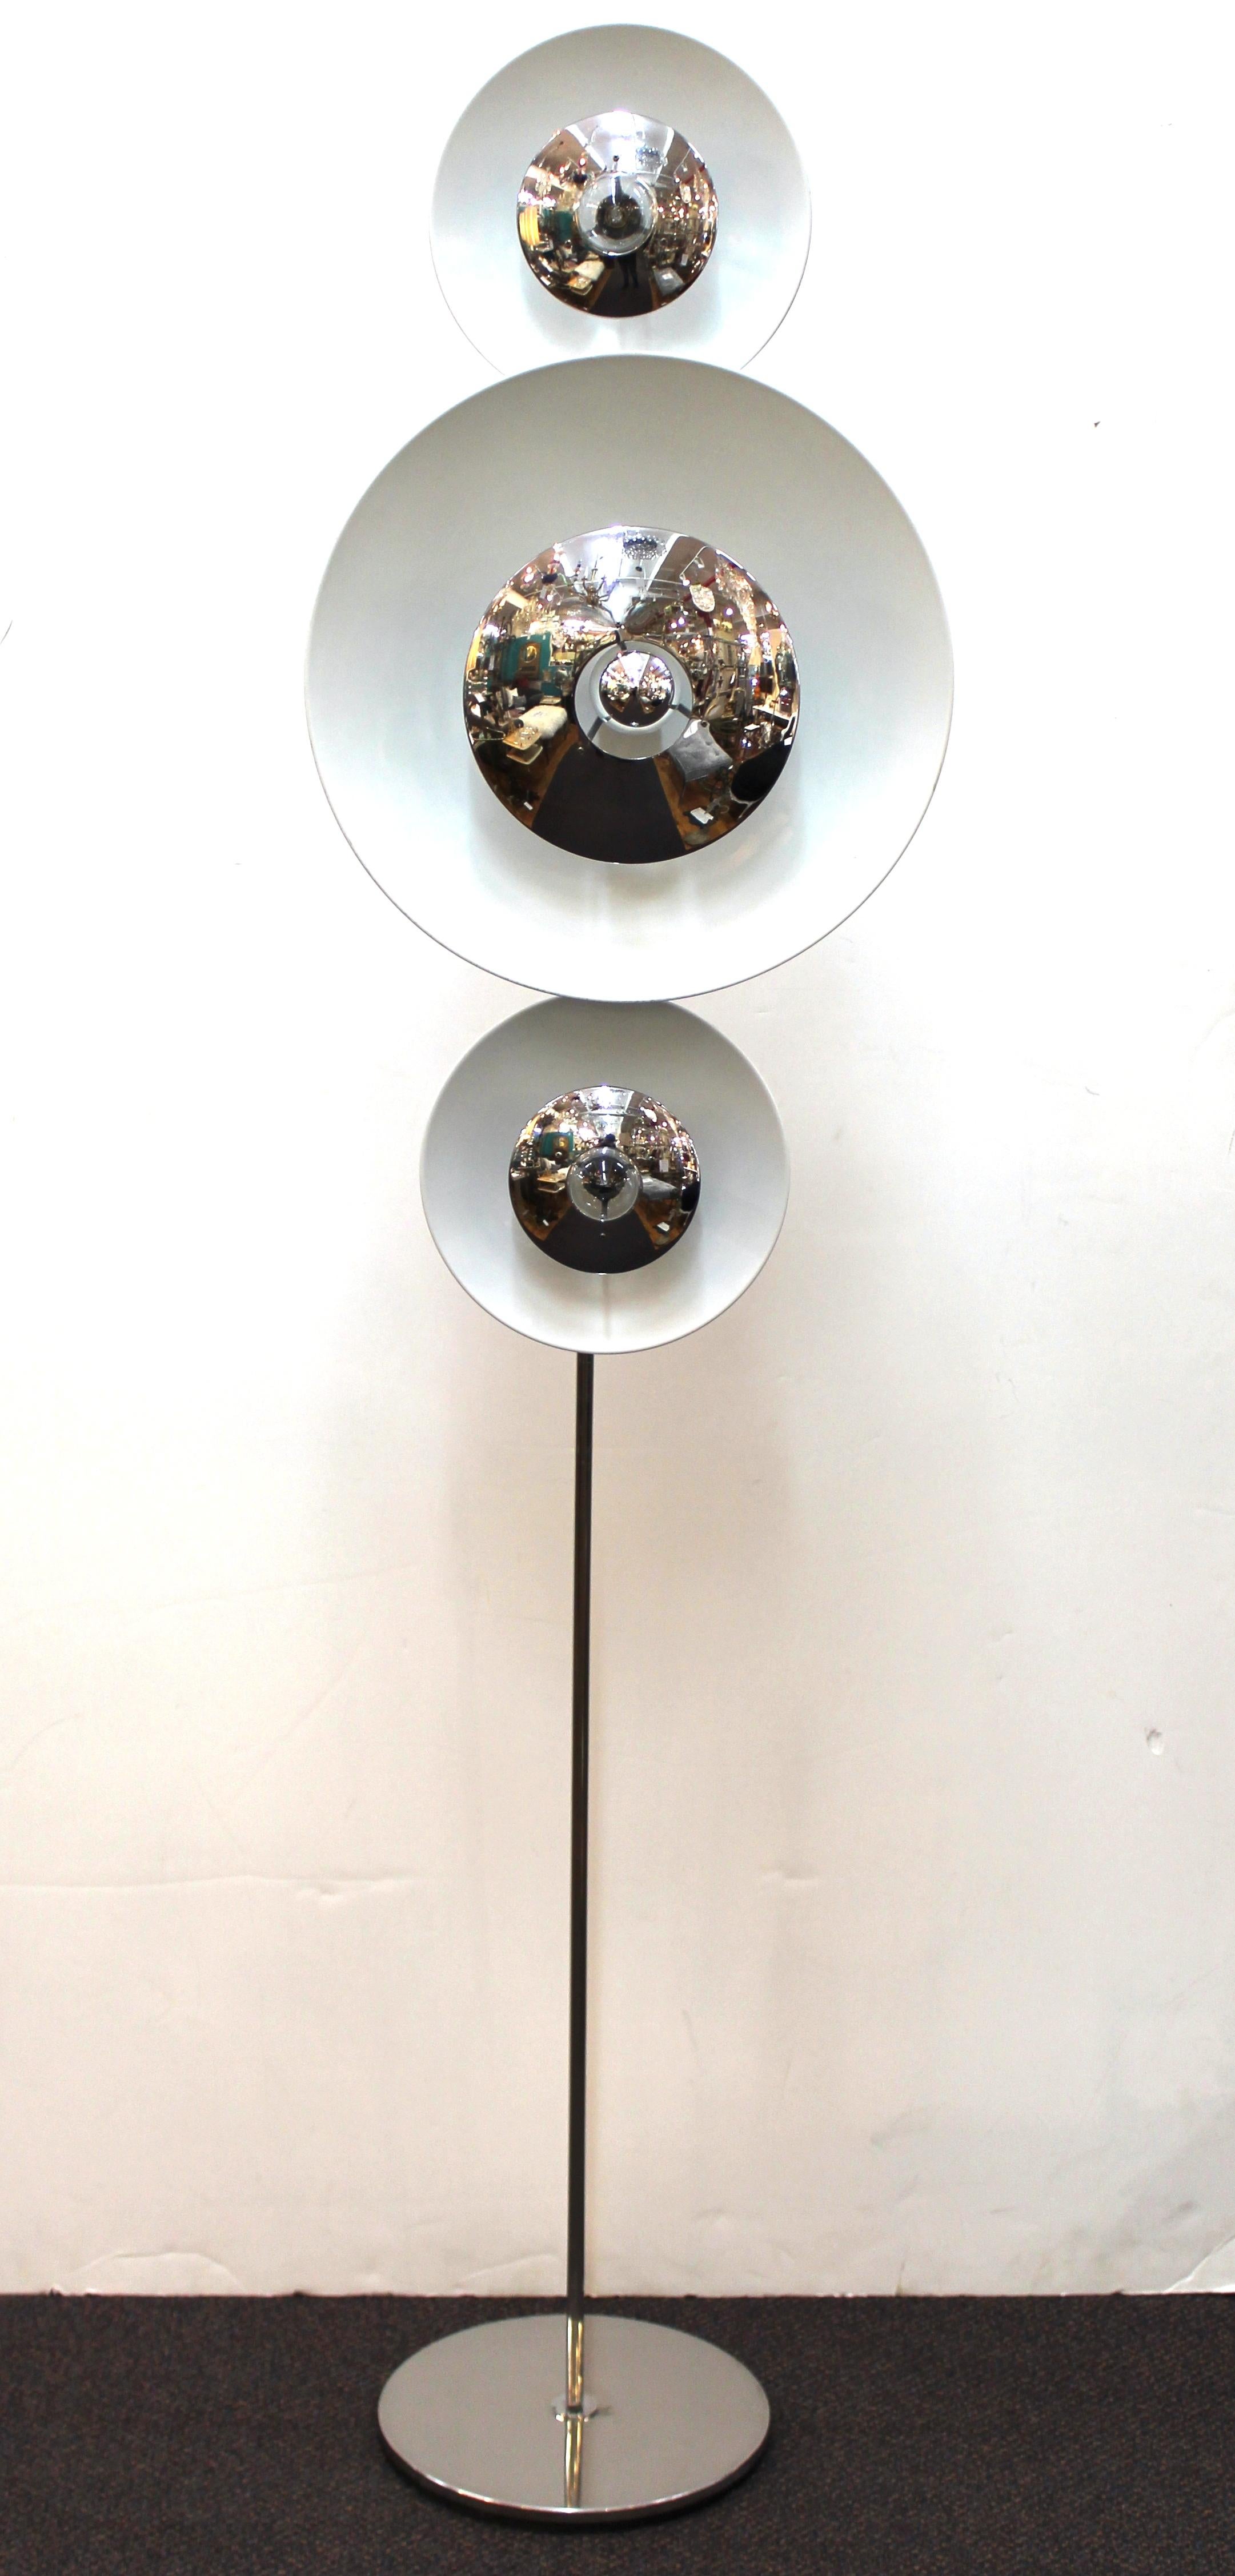 A pair of Italian modern floor lamps designed by Enrico Tronconi in the 1970s. Each lamp consists of three light elements with saucer shaped discs that can be removed and freely re-positioned on the metal rod. Two small discs and one large one per